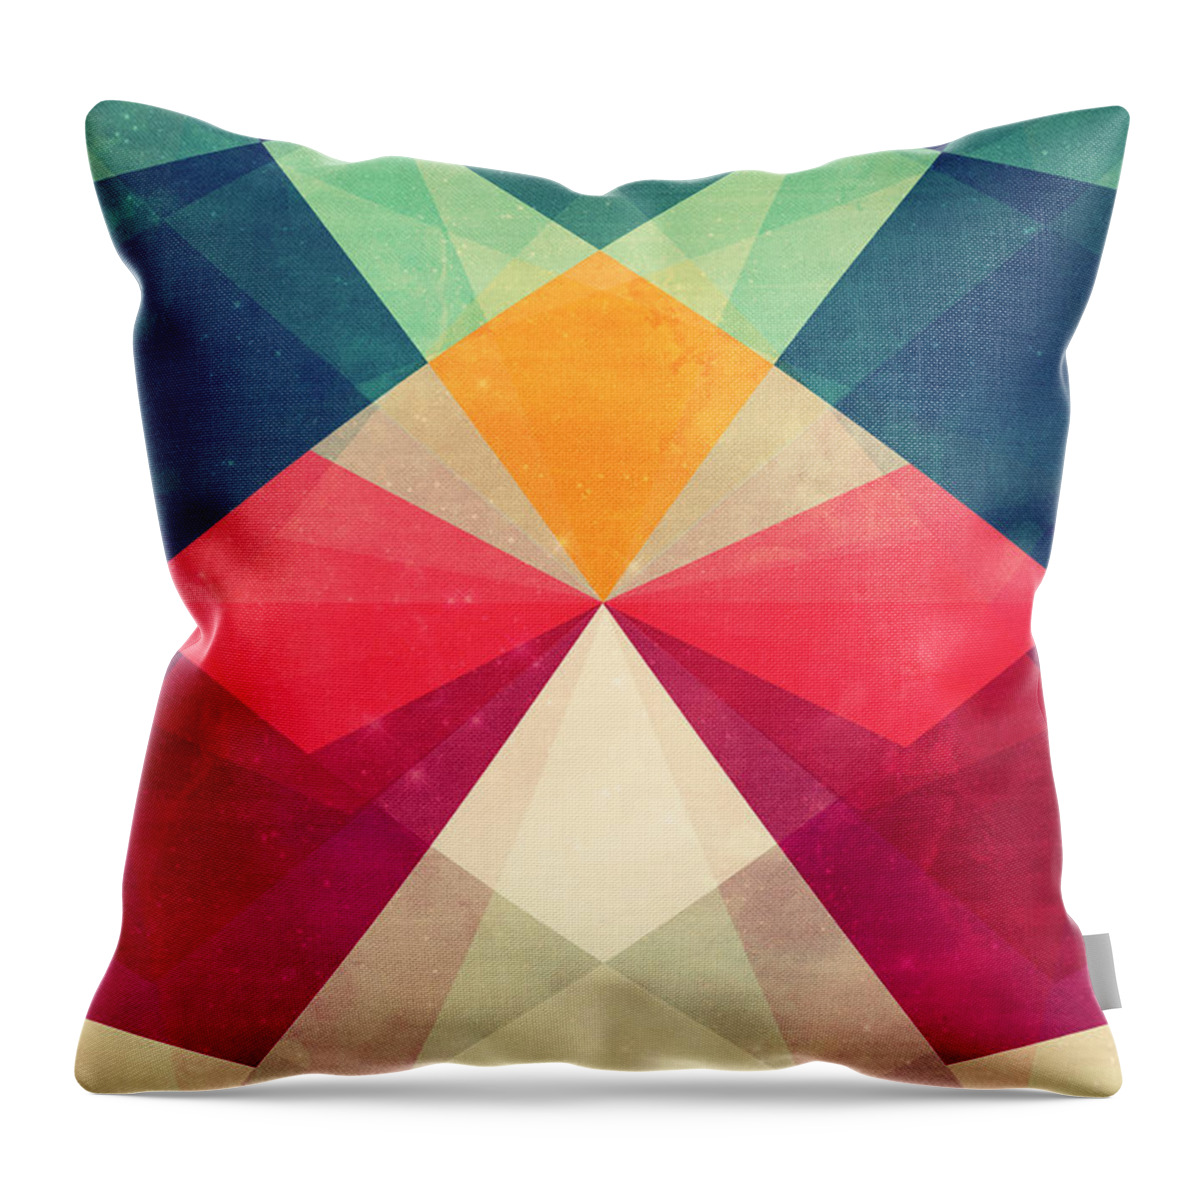 Abstract Throw Pillow featuring the digital art Meet me halfway by Vess DSign